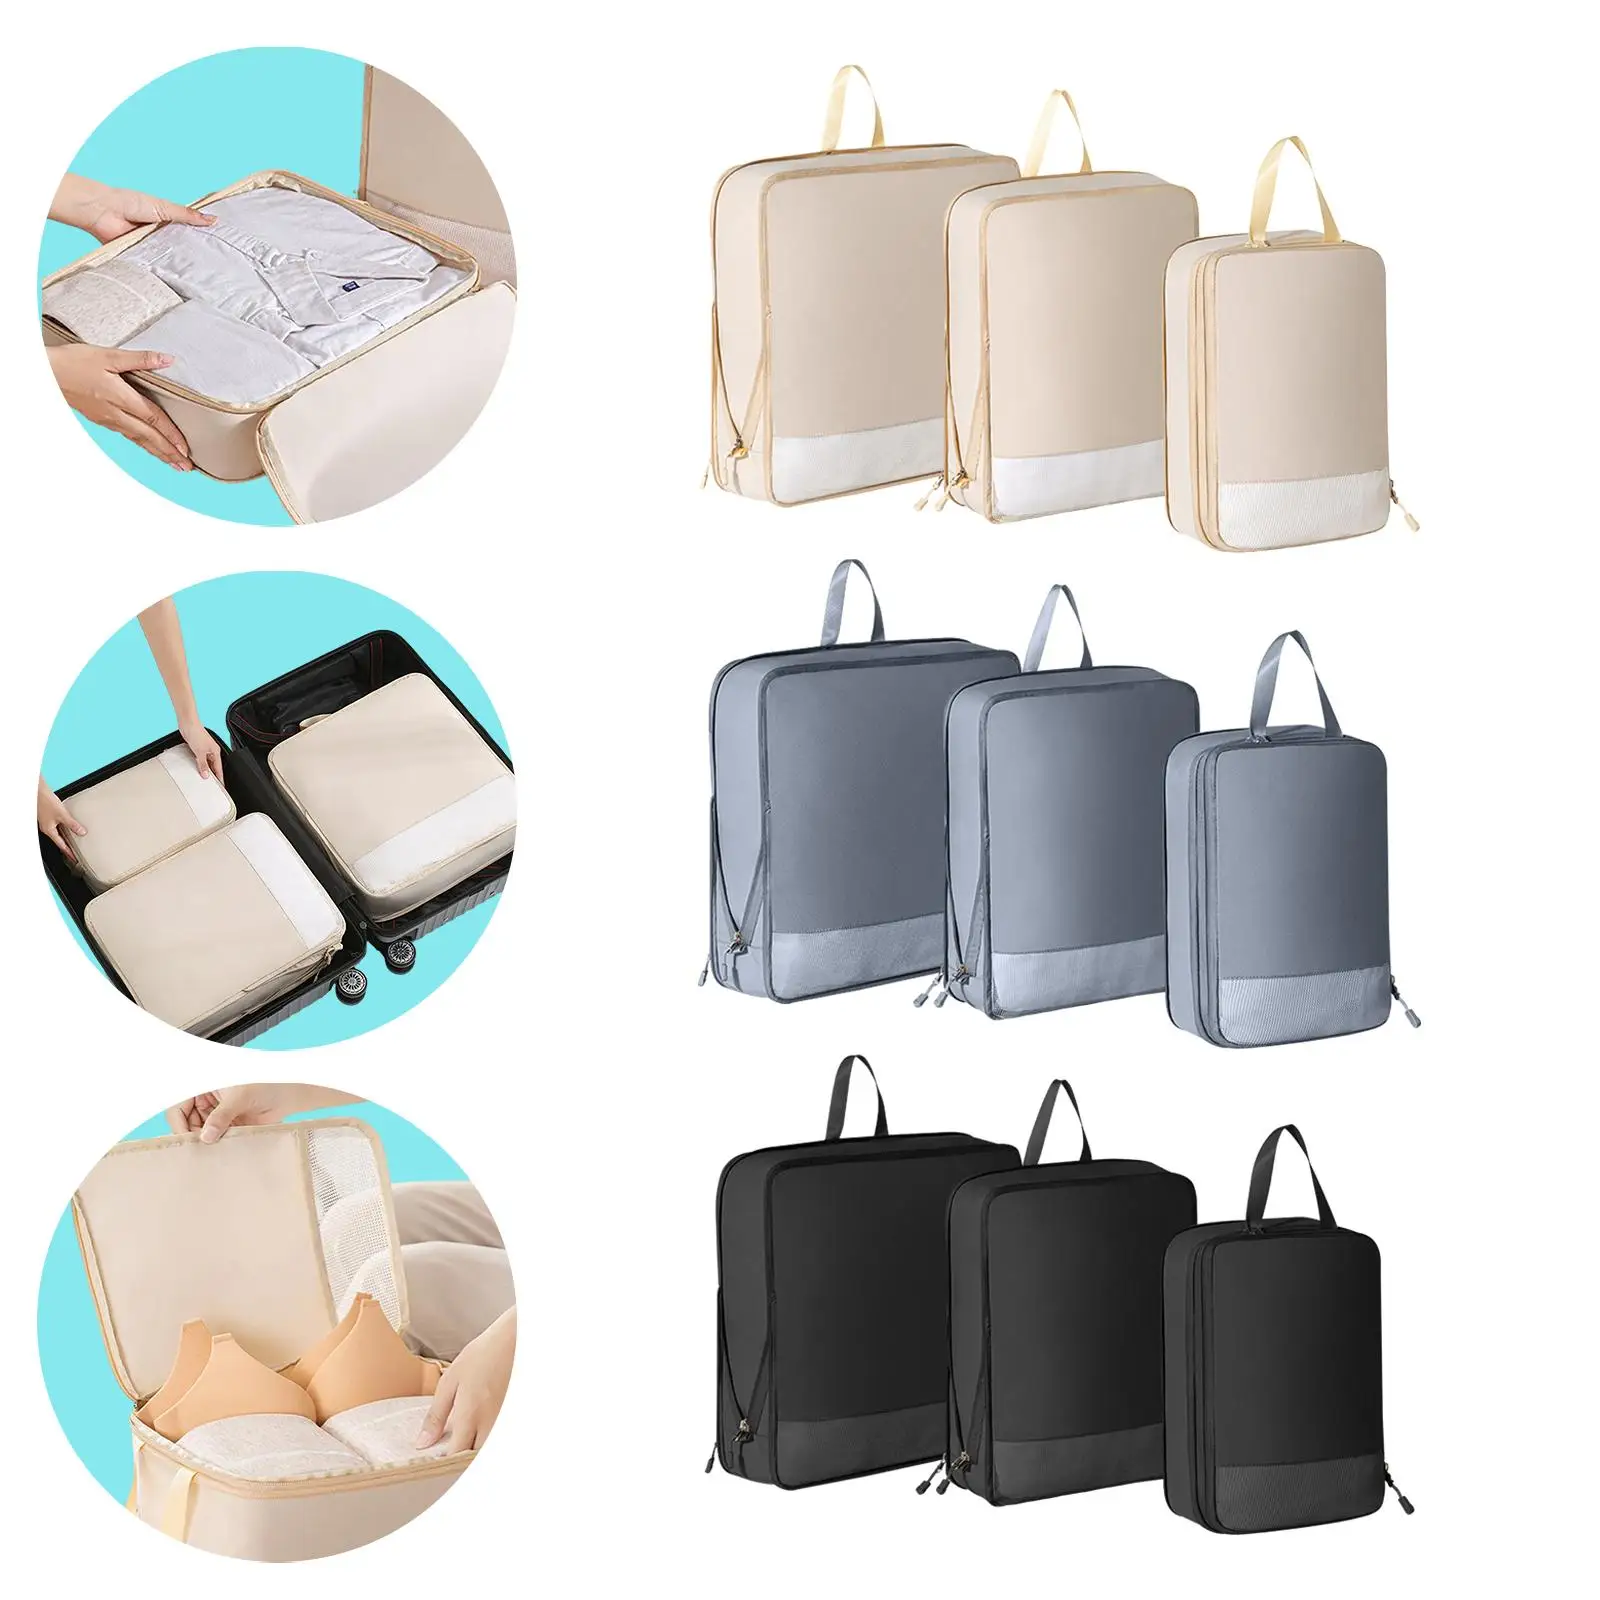 3 Pieces Compression Packing Cubes Set Luggage Packing Organizer Wardrobe Organizers Bags for Daily Use Travel Accessories